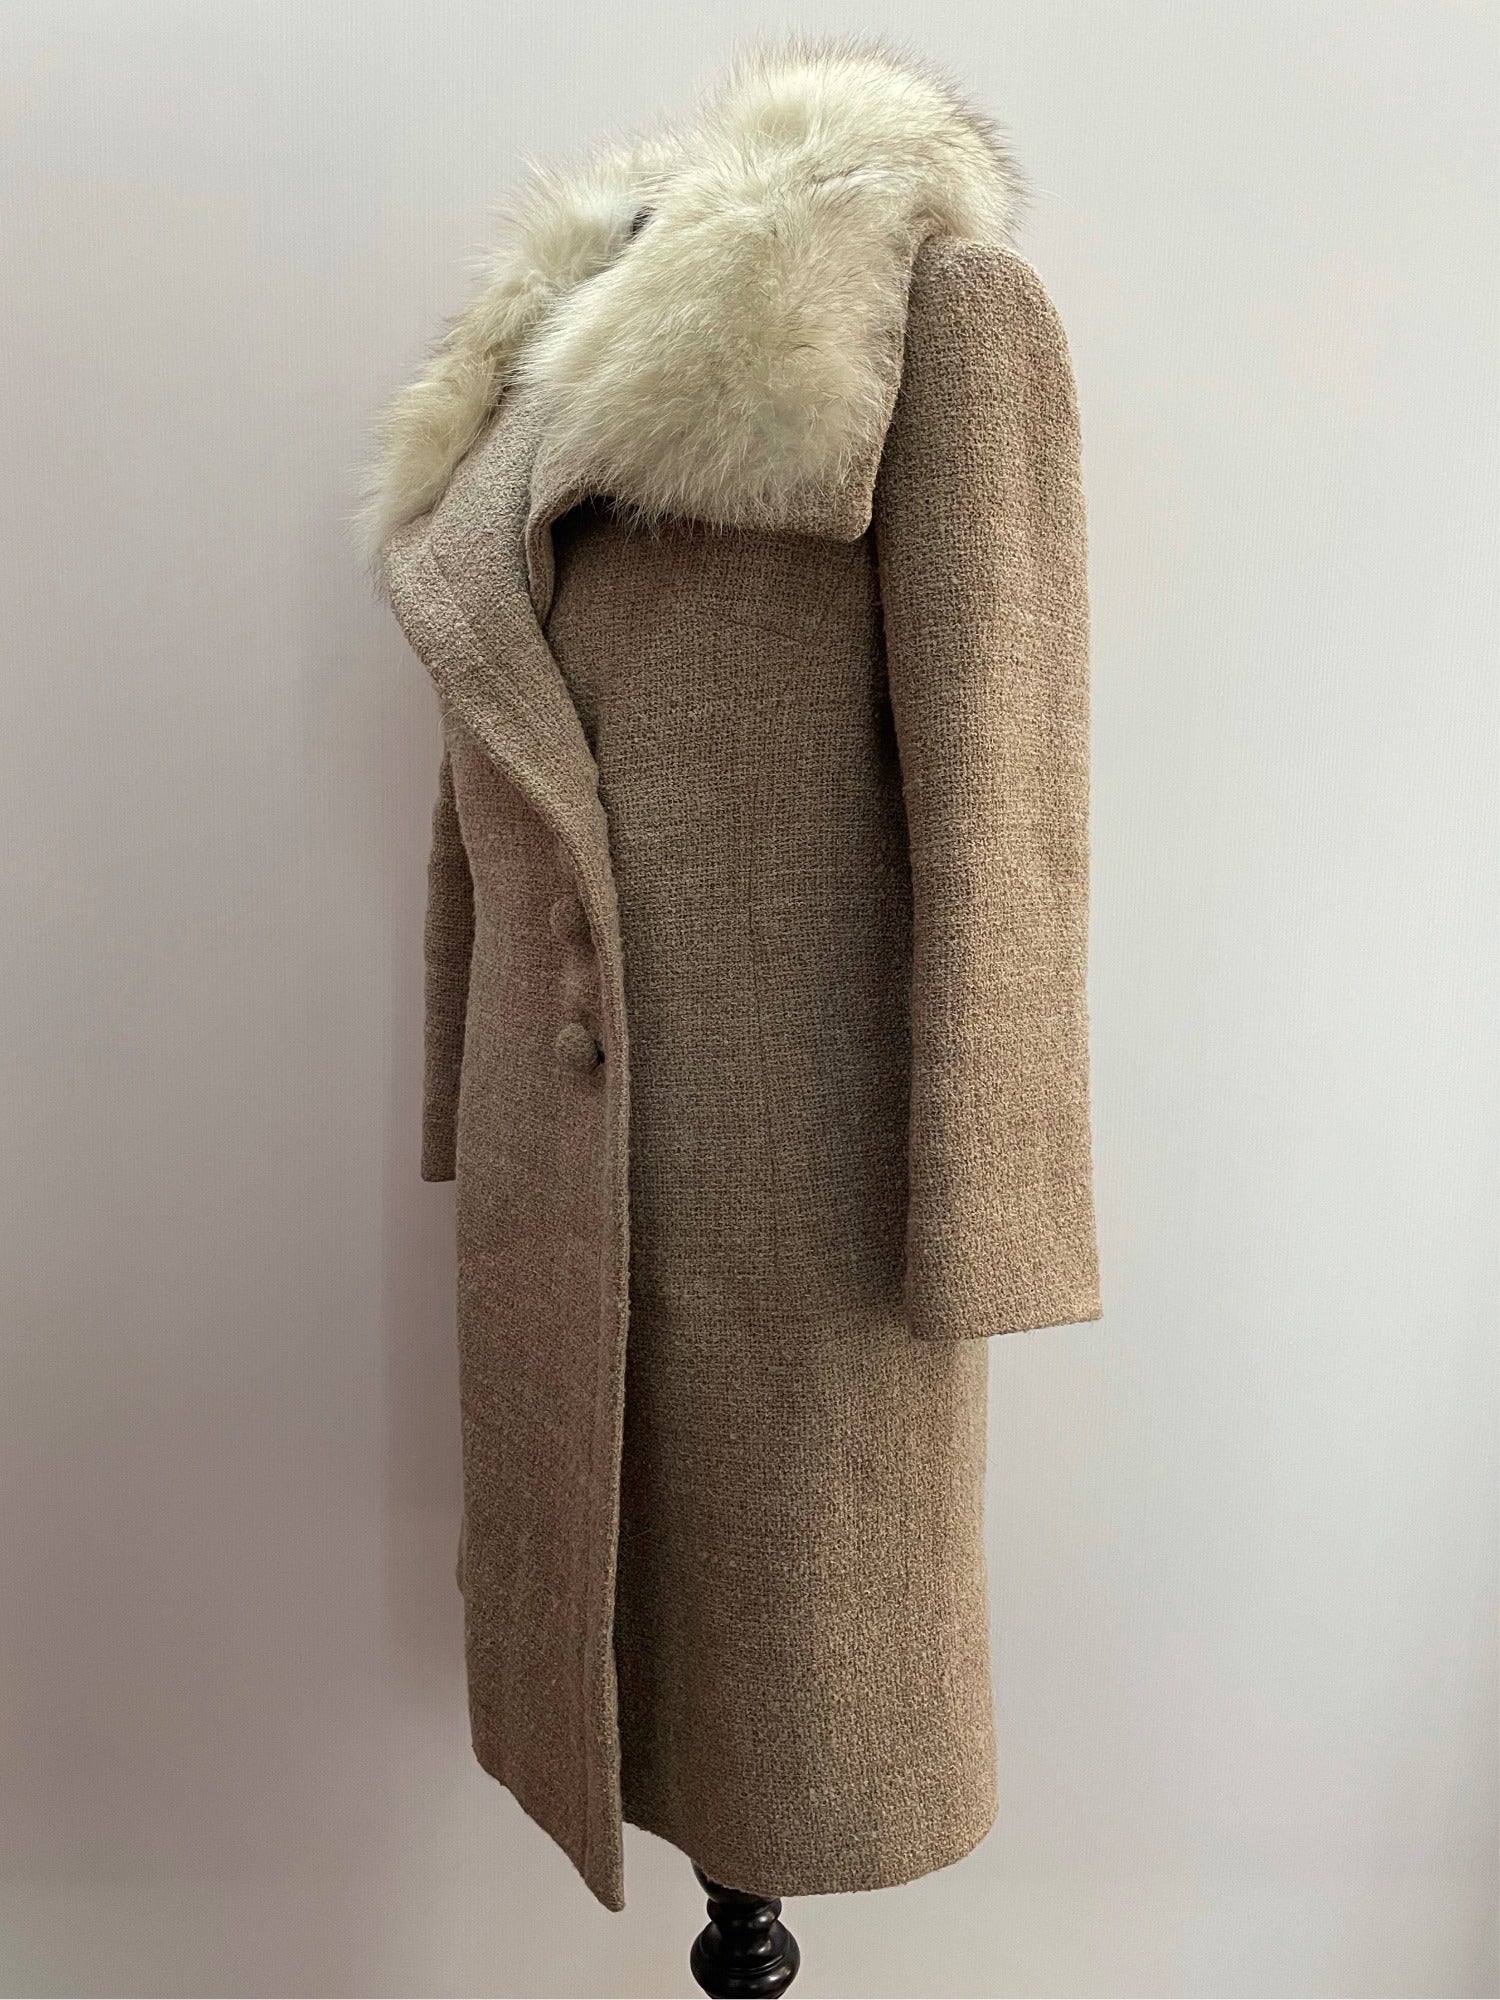 1960s Real Fox Fur Collar Beige Double Breasted Boucle Wool Coat By Jaeger - Size 10